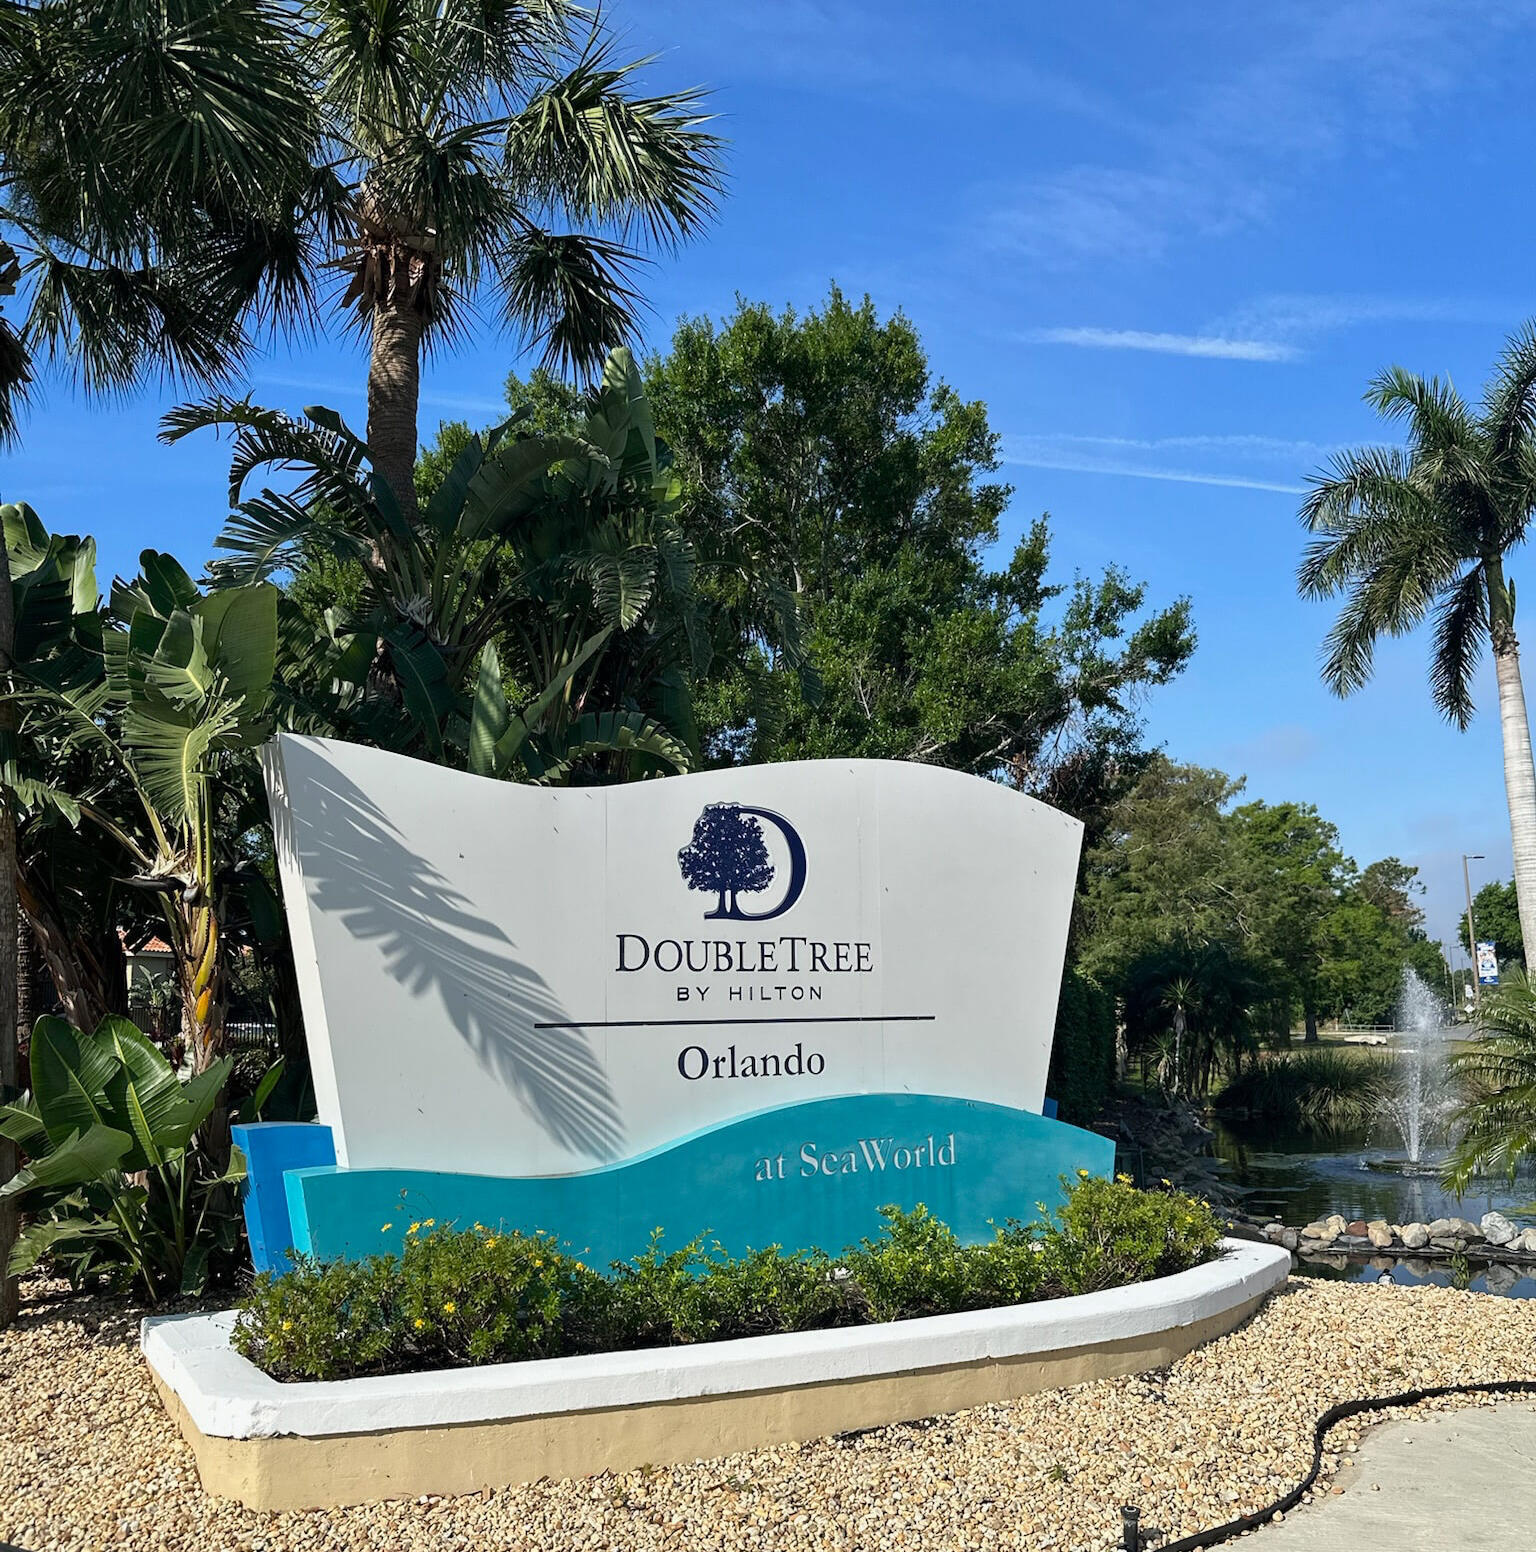 ROH Hotel Management Software Onboarding: Doubletree Orlando at SeaWorld Hotel entrance sign